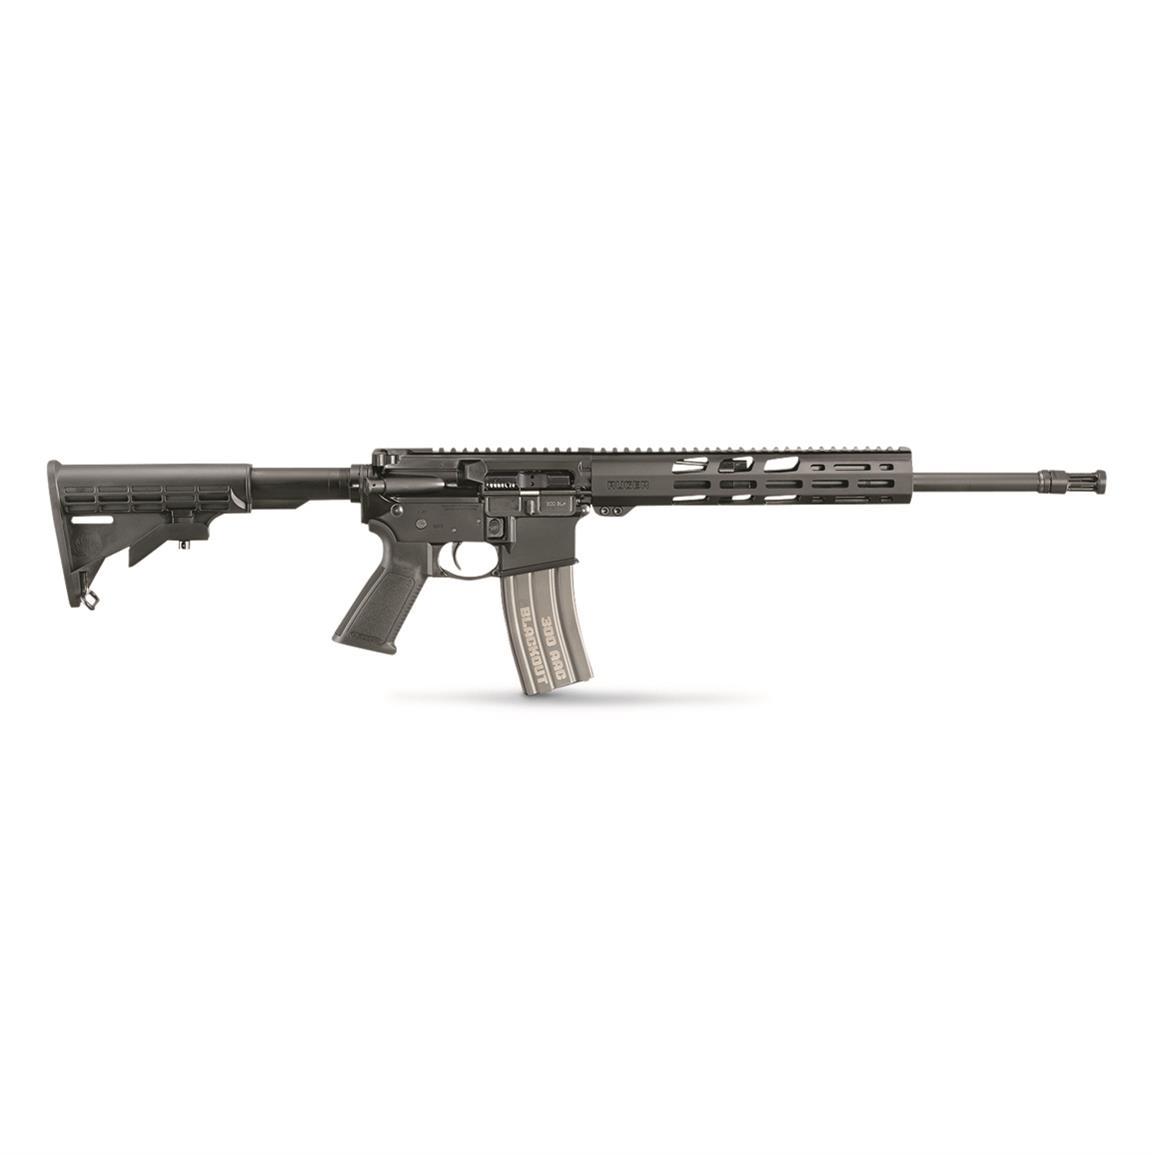 Ruger AR-556, Semi-automatic, .300 AAC Blackout, 16.1" Barrel, 30+1 Rounds